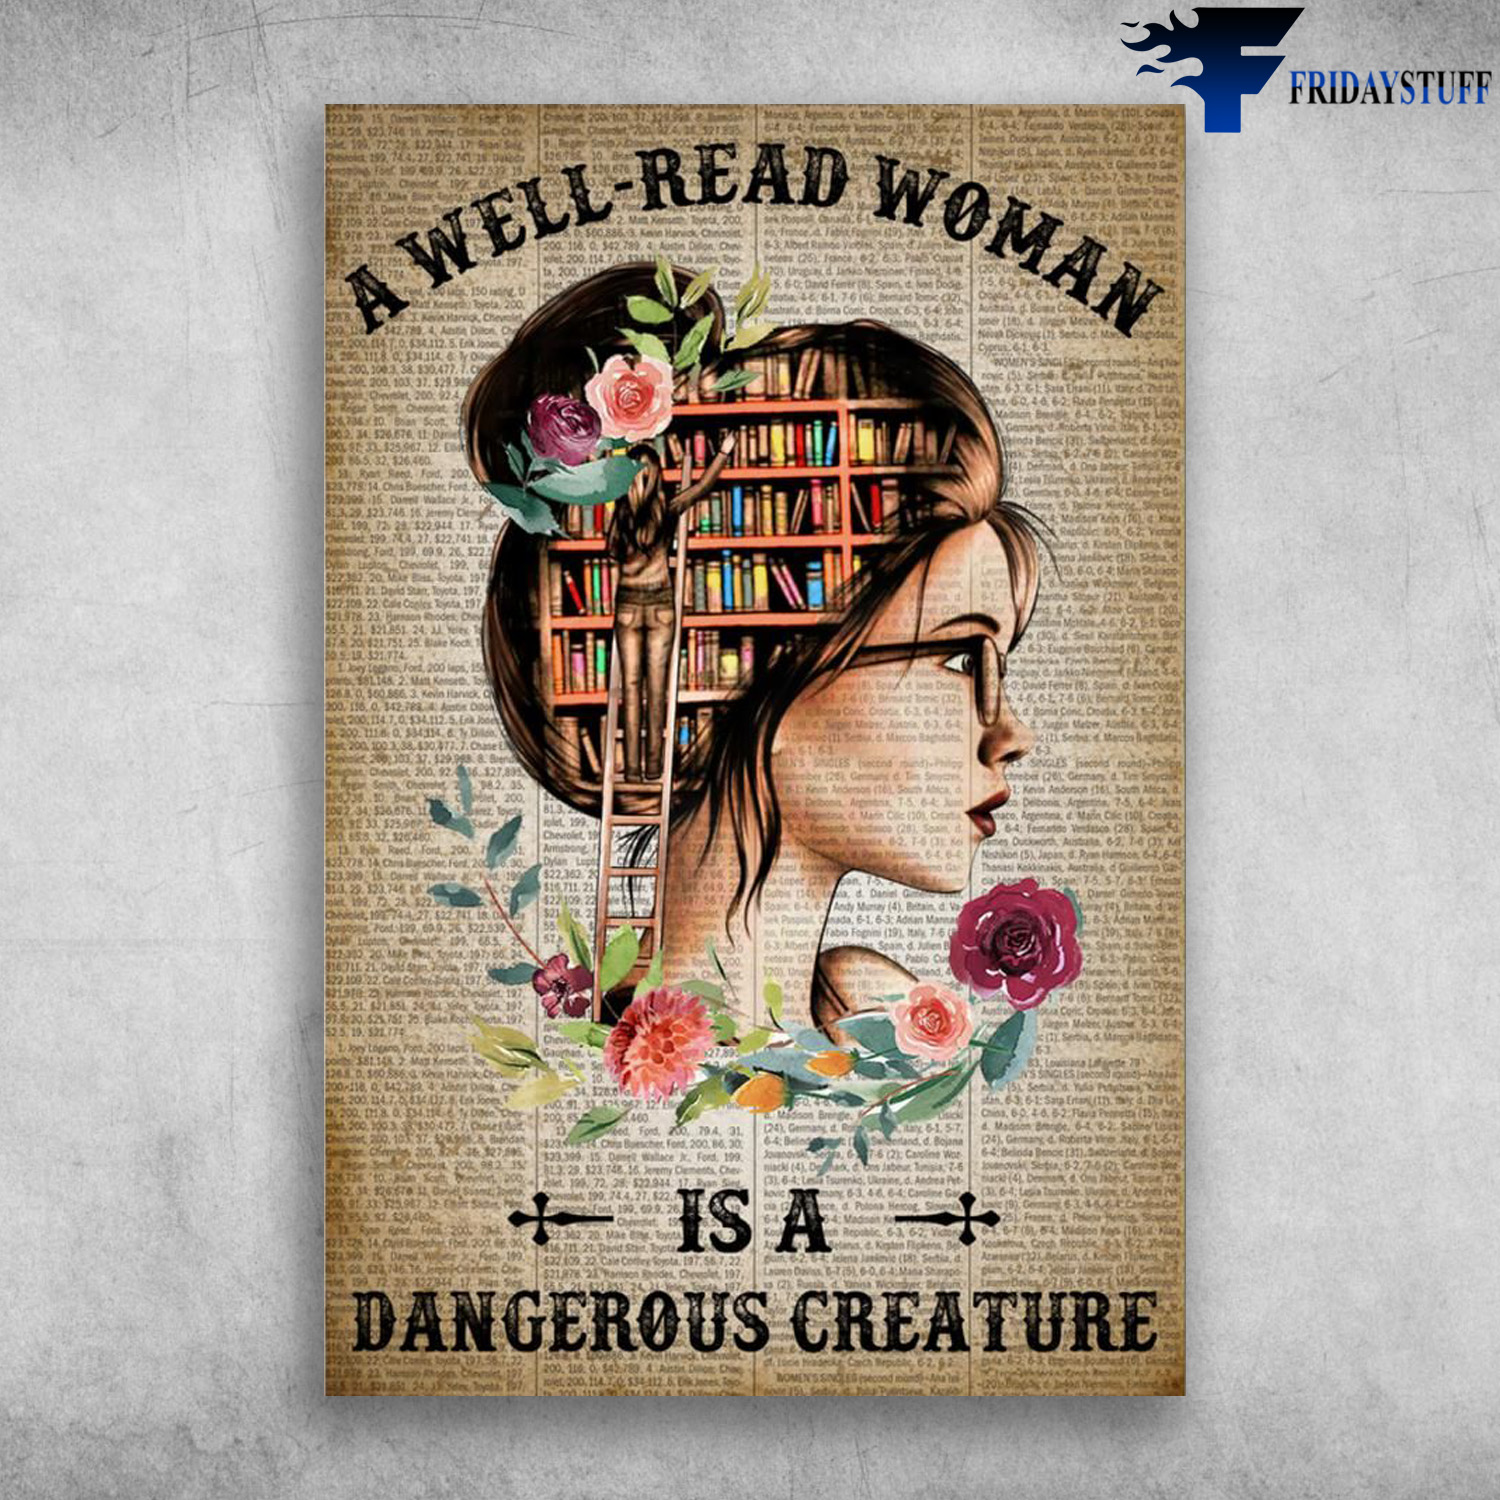 Girl Loves Books - A Well-Read Woman Is A Dangerous Creature